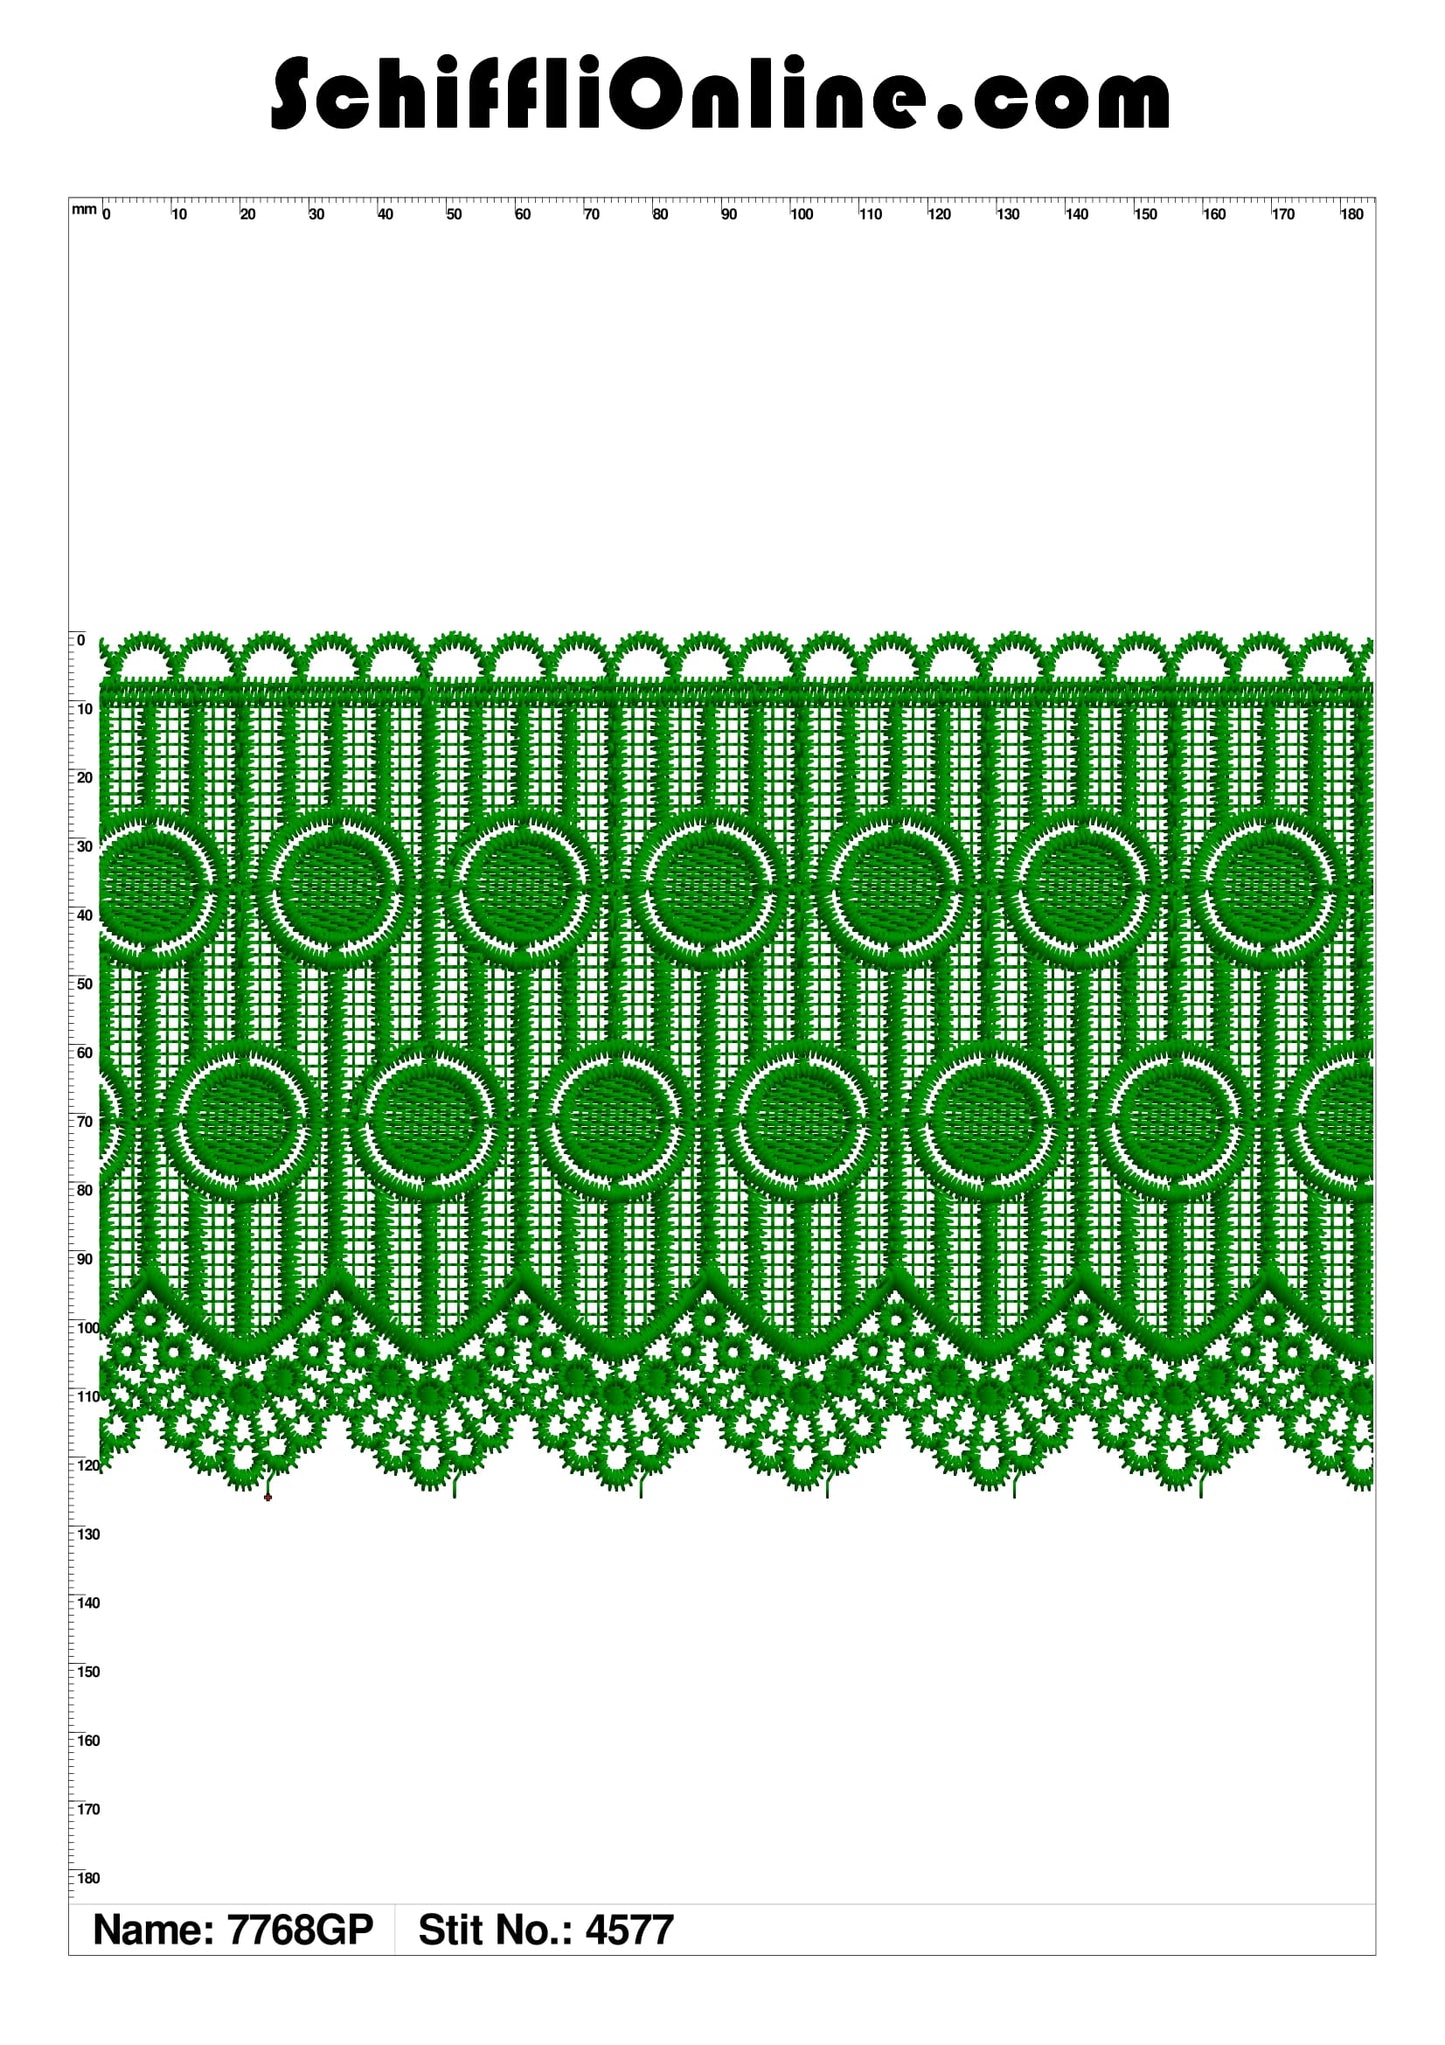 Book 156 CHEMICAL LACE 4X4 50 DESIGNS